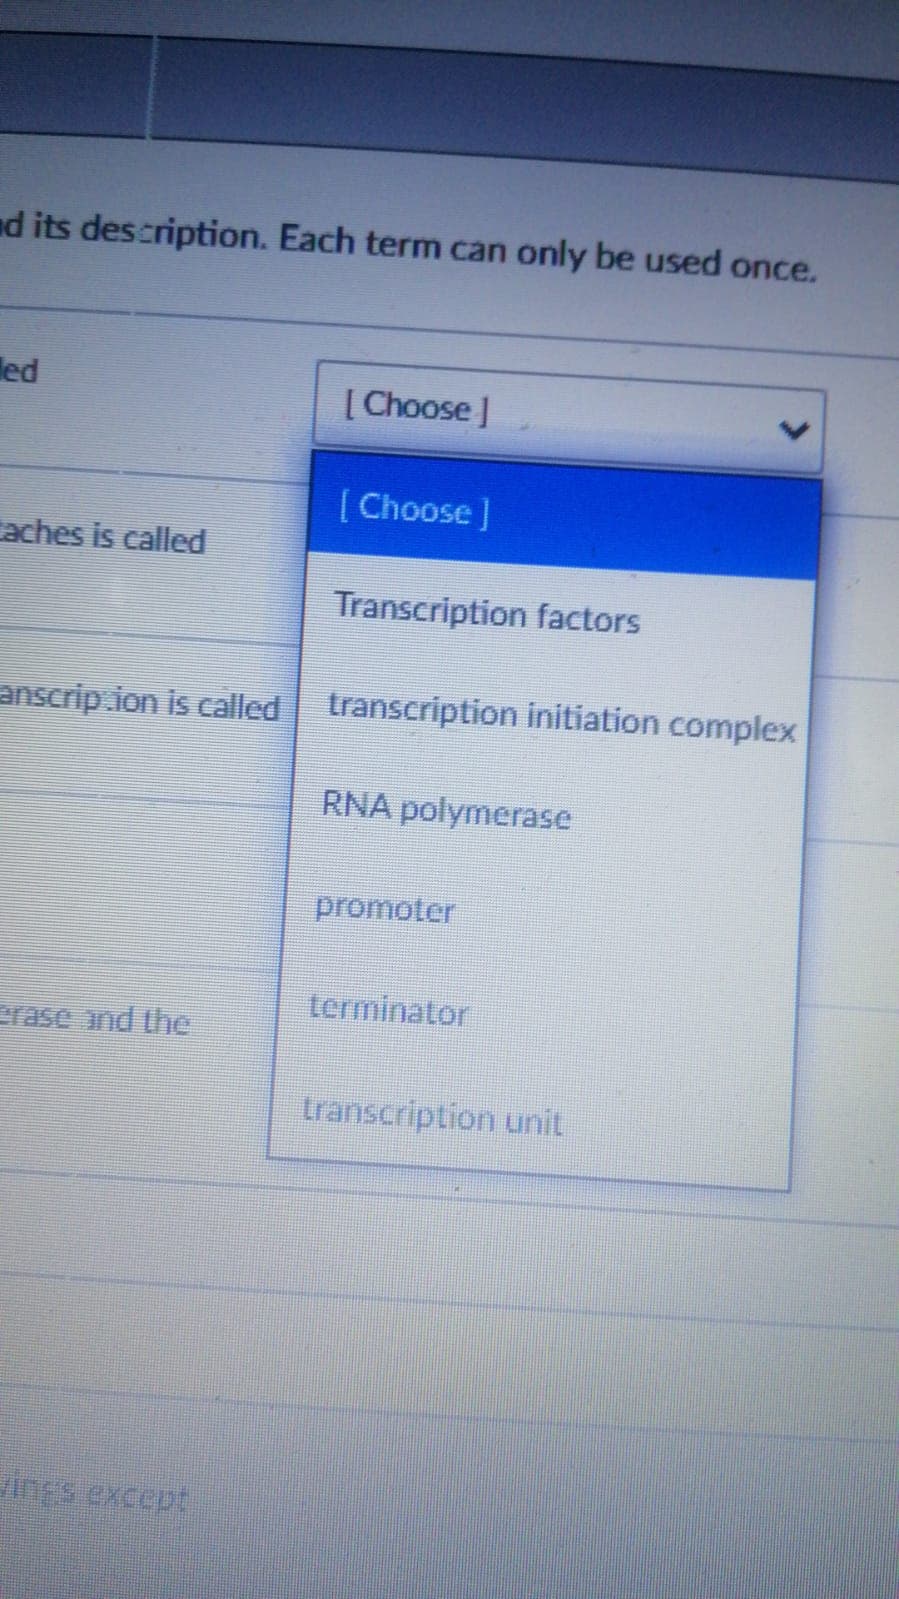 nd its description. Each term can only be used once.
led
[ Choose J
( Choose]
Caches is called
Transcription factors
anscrip.ion is called
transcription initiation complex
RNA polymerase
promoter
terminator
rase and the
transcription unit
ings except
